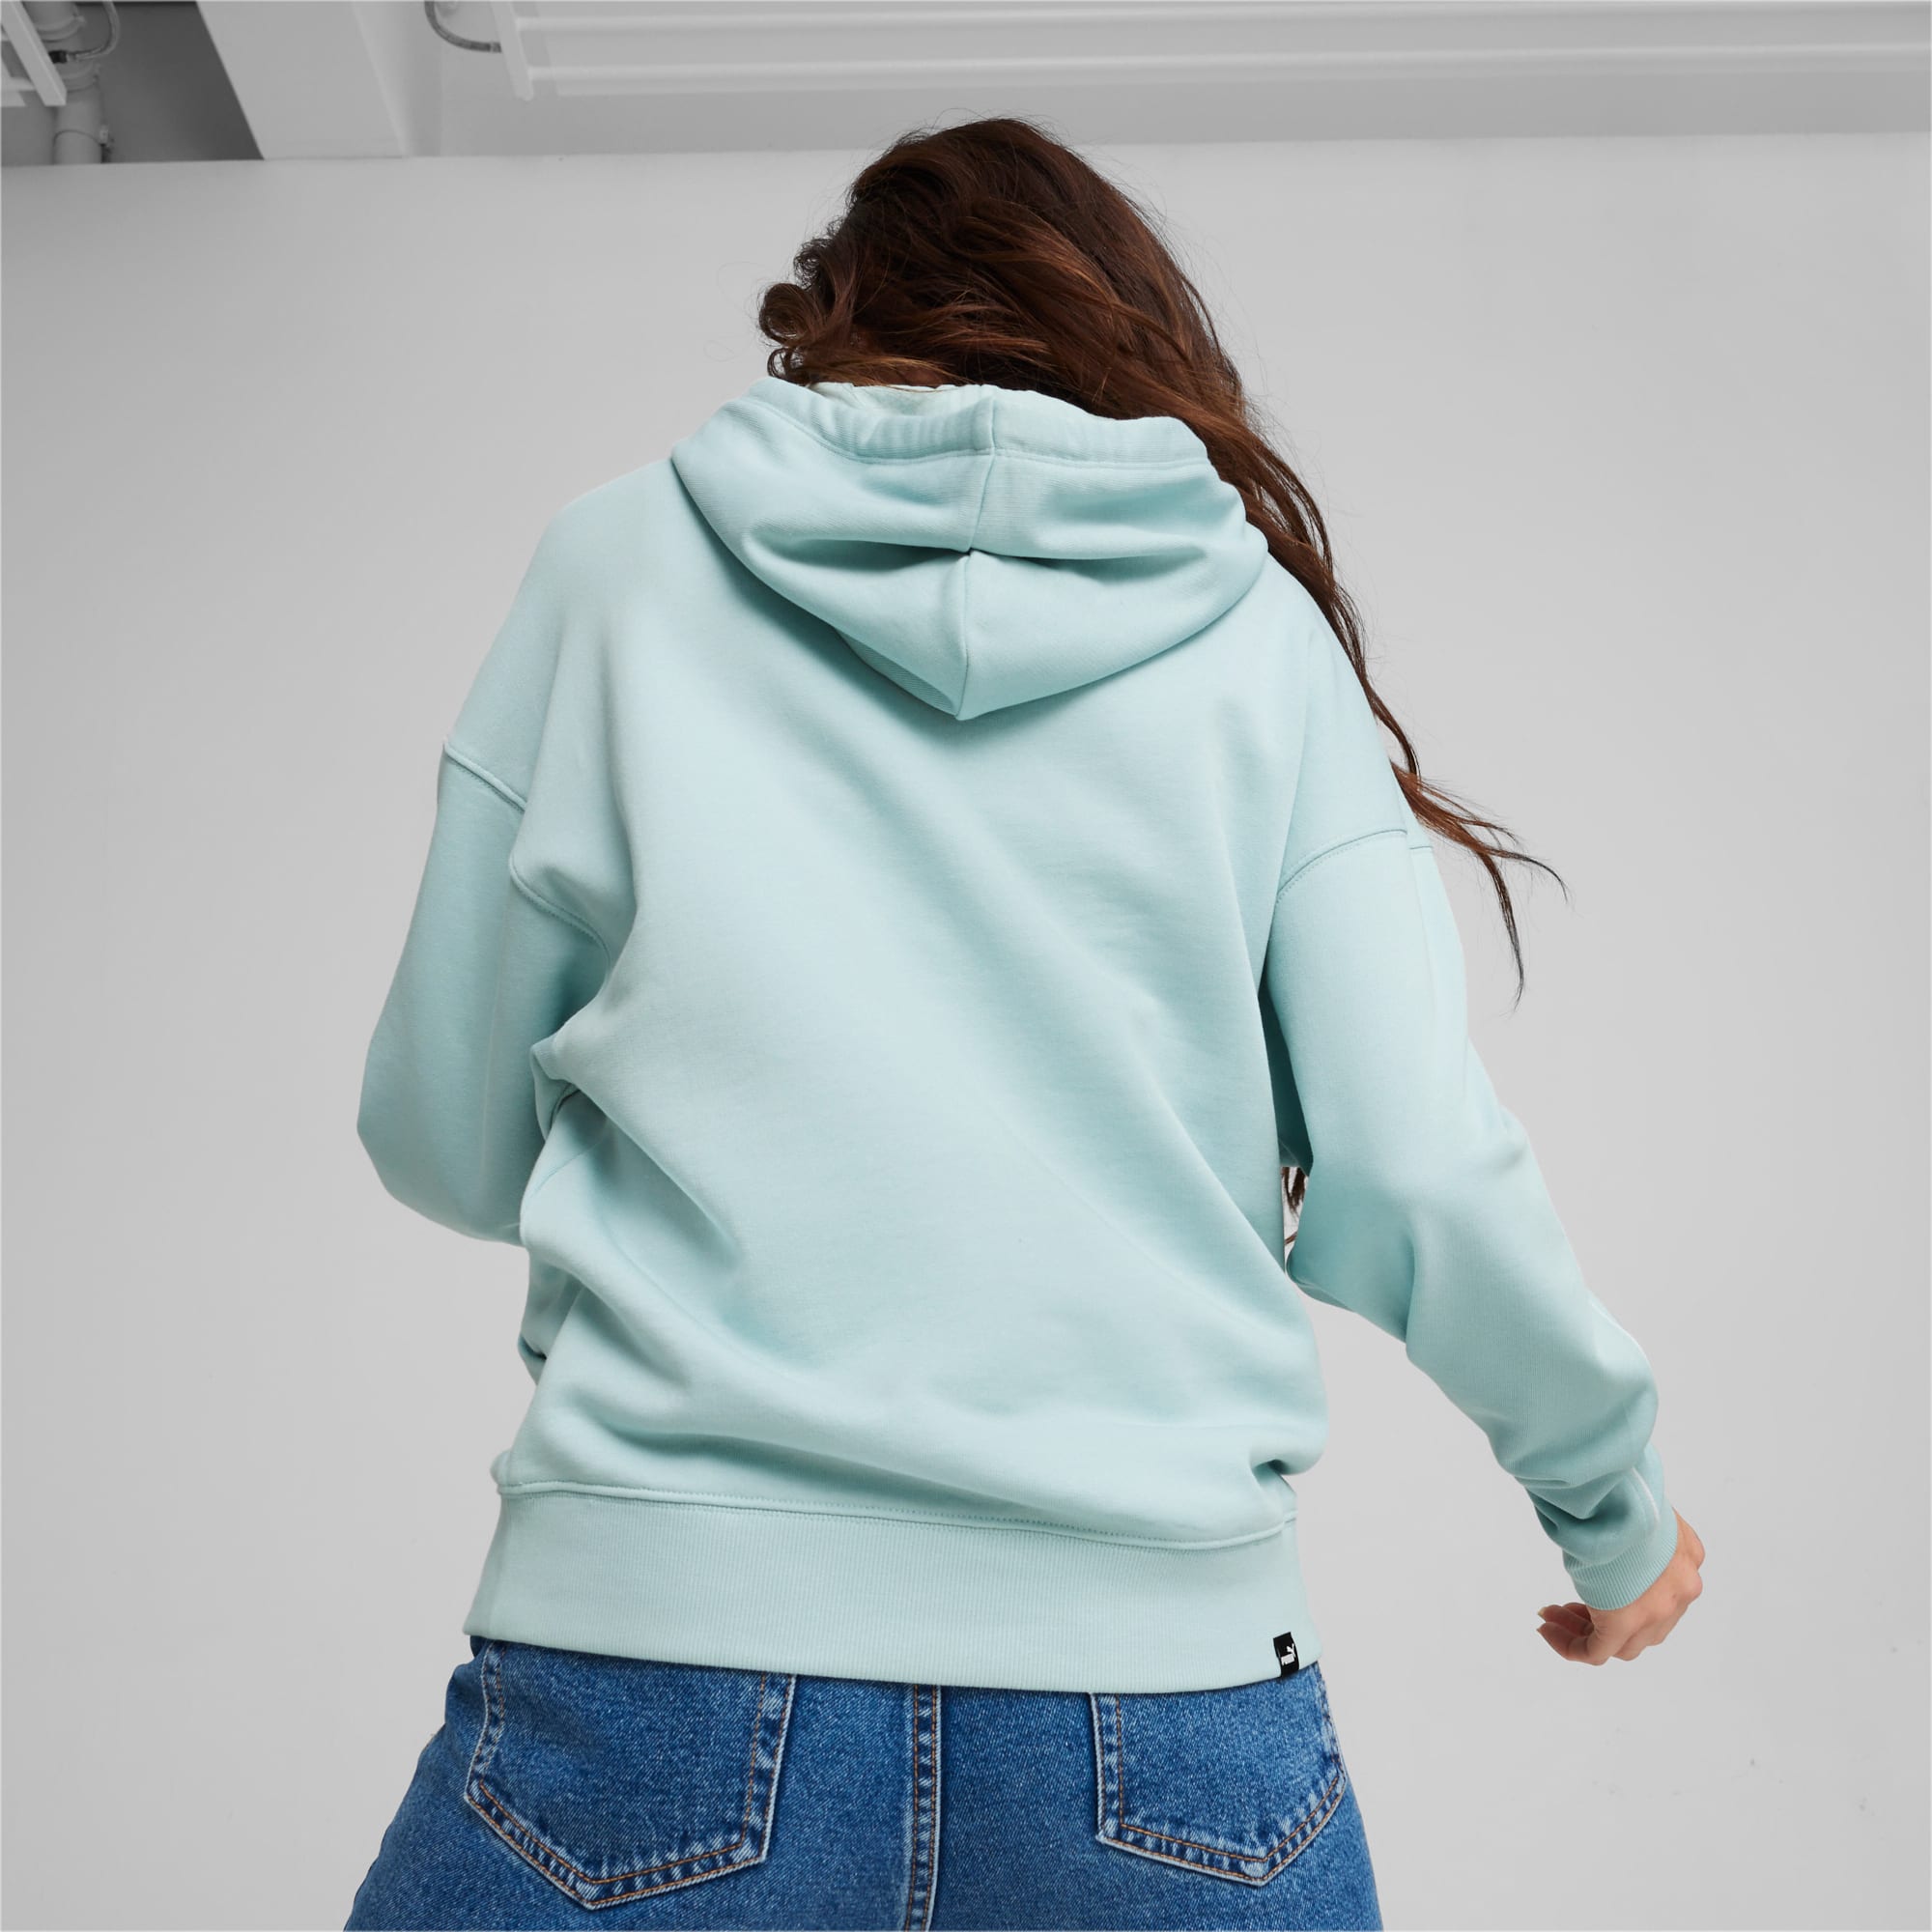 ▷ Chándal PUMA de Mujer Classic Hooded Sweat Suit